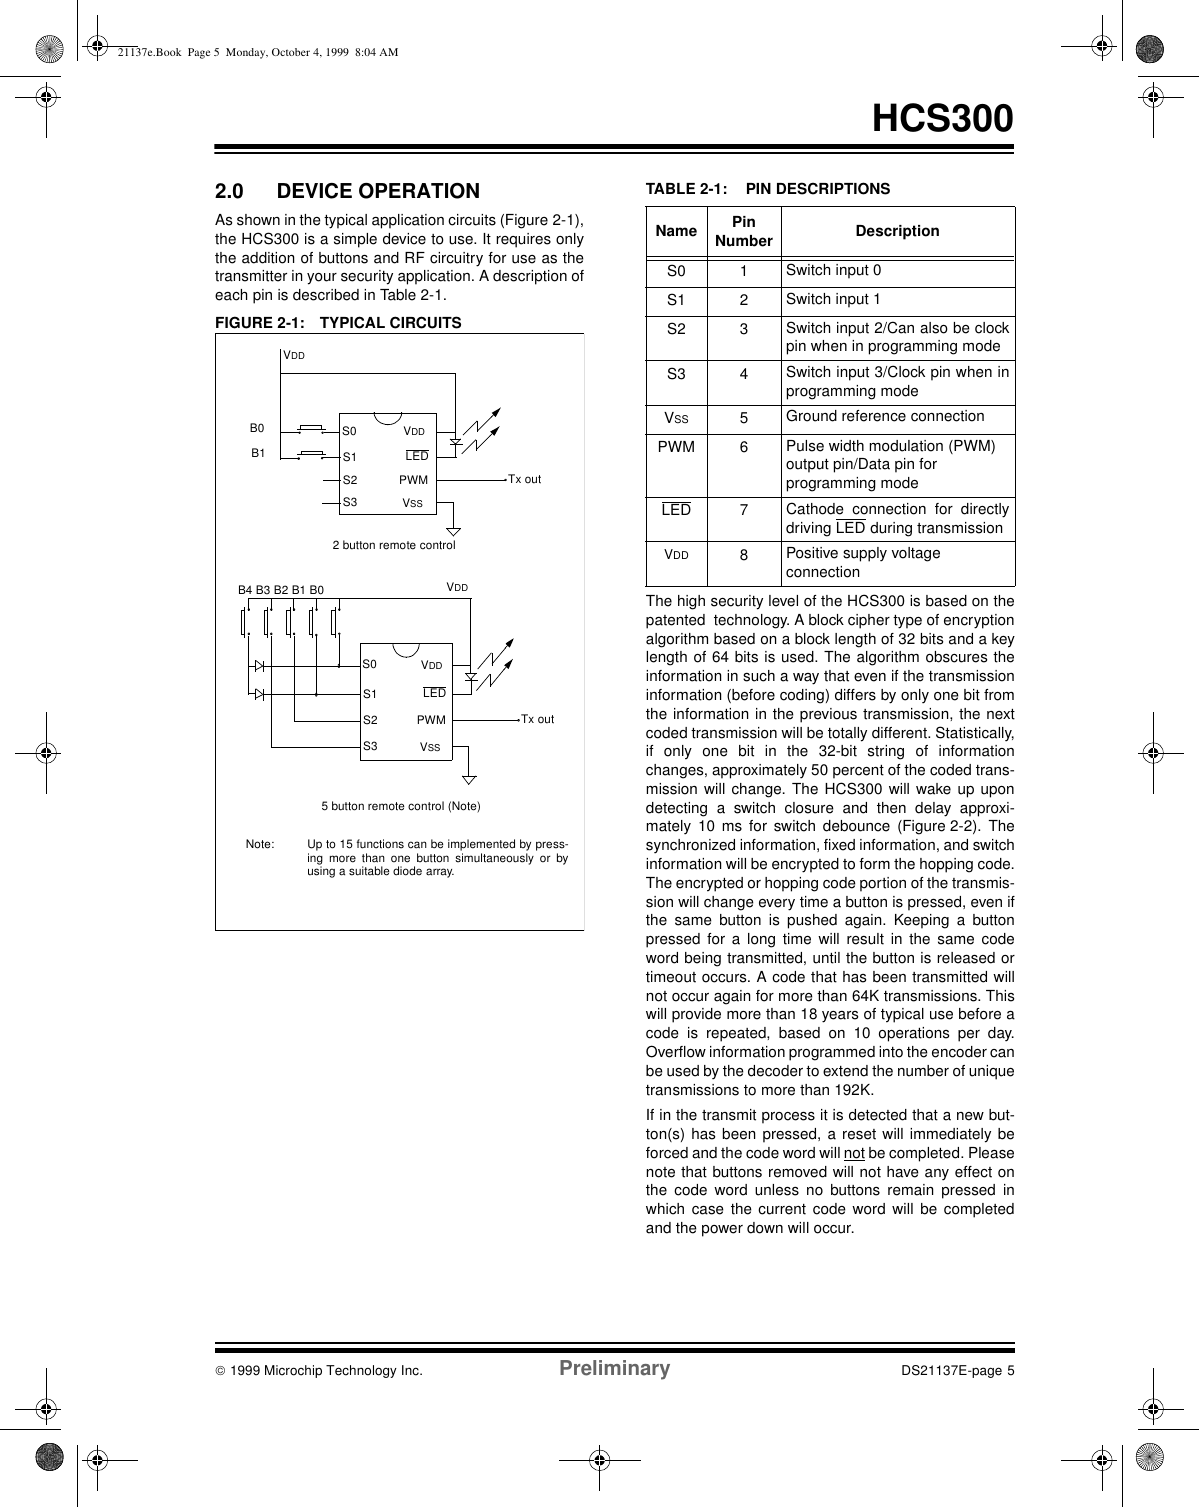  1999 Microchip Technology Inc. Preliminary DS21137E-page 5HCS3002.0 DEVICE OPERATIONAs shown in the typical application circuits (Figure 2-1),the HCS300 is a simple device to use. It requires onlythe addition of buttons and RF circuitry for use as thetransmitter in your security application. A description ofeach pin is described in Table 2-1.FIGURE 2-1: TYPICAL CIRCUITSTABLE 2-1: PIN DESCRIPTIONSThe high security level of the HCS300 is based on thepatented  technology. A block cipher type of encryptionalgorithm based on a block length of 32 bits and a keylength of 64 bits is used. The algorithm obscures theinformation in such a way that even if the transmissioninformation (before coding) differs by only one bit fromthe information in the previous transmission, the nextcoded transmission will be totally different. Statistically,if only one bit in the 32-bit string of informationchanges, approximately 50 percent of the coded trans-mission will change. The HCS300 will wake up upondetecting a switch closure and then delay approxi-mately 10 ms for switch debounce (Figure 2-2). Thesynchronized information, fixed information, and switchinformation will be encrypted to form the hopping code.The encrypted or hopping code portion of the transmis-sion will change every time a button is pressed, even ifthe same button is pushed again. Keeping a buttonpressed for a long time will result in the same codeword being transmitted, until the button is released ortimeout occurs. A code that has been transmitted willnot occur again for more than 64K transmissions. Thiswill provide more than 18 years of typical use before acode is repeated, based on 10 operations per day.Overflow information programmed into the encoder canbe used by the decoder to extend the number of uniquetransmissions to more than 192K.If in the transmit process it is detected that a new but-ton(s) has been pressed, a reset will immediately beforced and the code word will not be completed. Pleasenote that buttons removed will not have any effect onthe code word unless no buttons remain pressed inwhich case the current code word will be completedand the power down will occur.VDDB0Tx outS0S1S2S3LEDVDDPWMVSS2 button remote controlB1VDDTx outS0S1S2S3LEDVDDPWMVSS5 button remote control (Note)B4 B3 B2 B1 B0Note: Up to 15 functions can be implemented by press-ing more than one button simultaneously or byusing a suitable diode array.Name PinNumber DescriptionS0 1 Switch input 0S1 2 Switch input 1S2 3 Switch input 2/Can also be clockpin when in programming modeS3 4 Switch input 3/Clock pin when inprogramming modeVSS 5Ground reference connection PWM 6 Pulse width modulation (PWM)output pin/Data pin forprogramming modeLED 7Cathode connection for directlydriving LED during transmissionVDD 8Positive supply voltageconnection21137e.Book  Page 5  Monday, October 4, 1999  8:04 AM